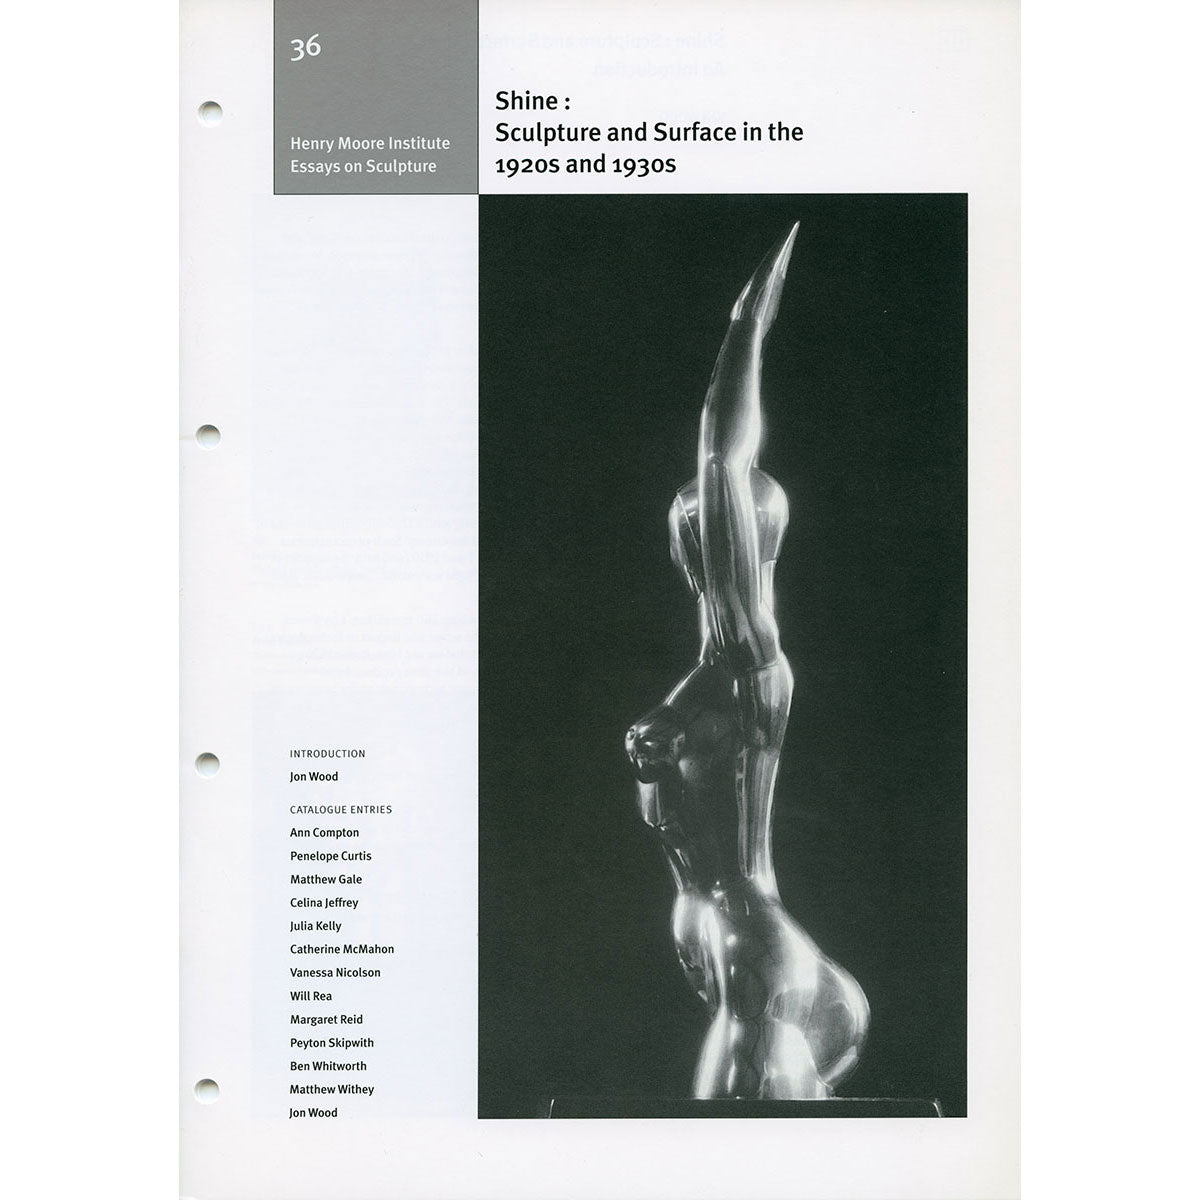 Shine: Sculpture and Surface in the 1920s and 1930s (No. 36)